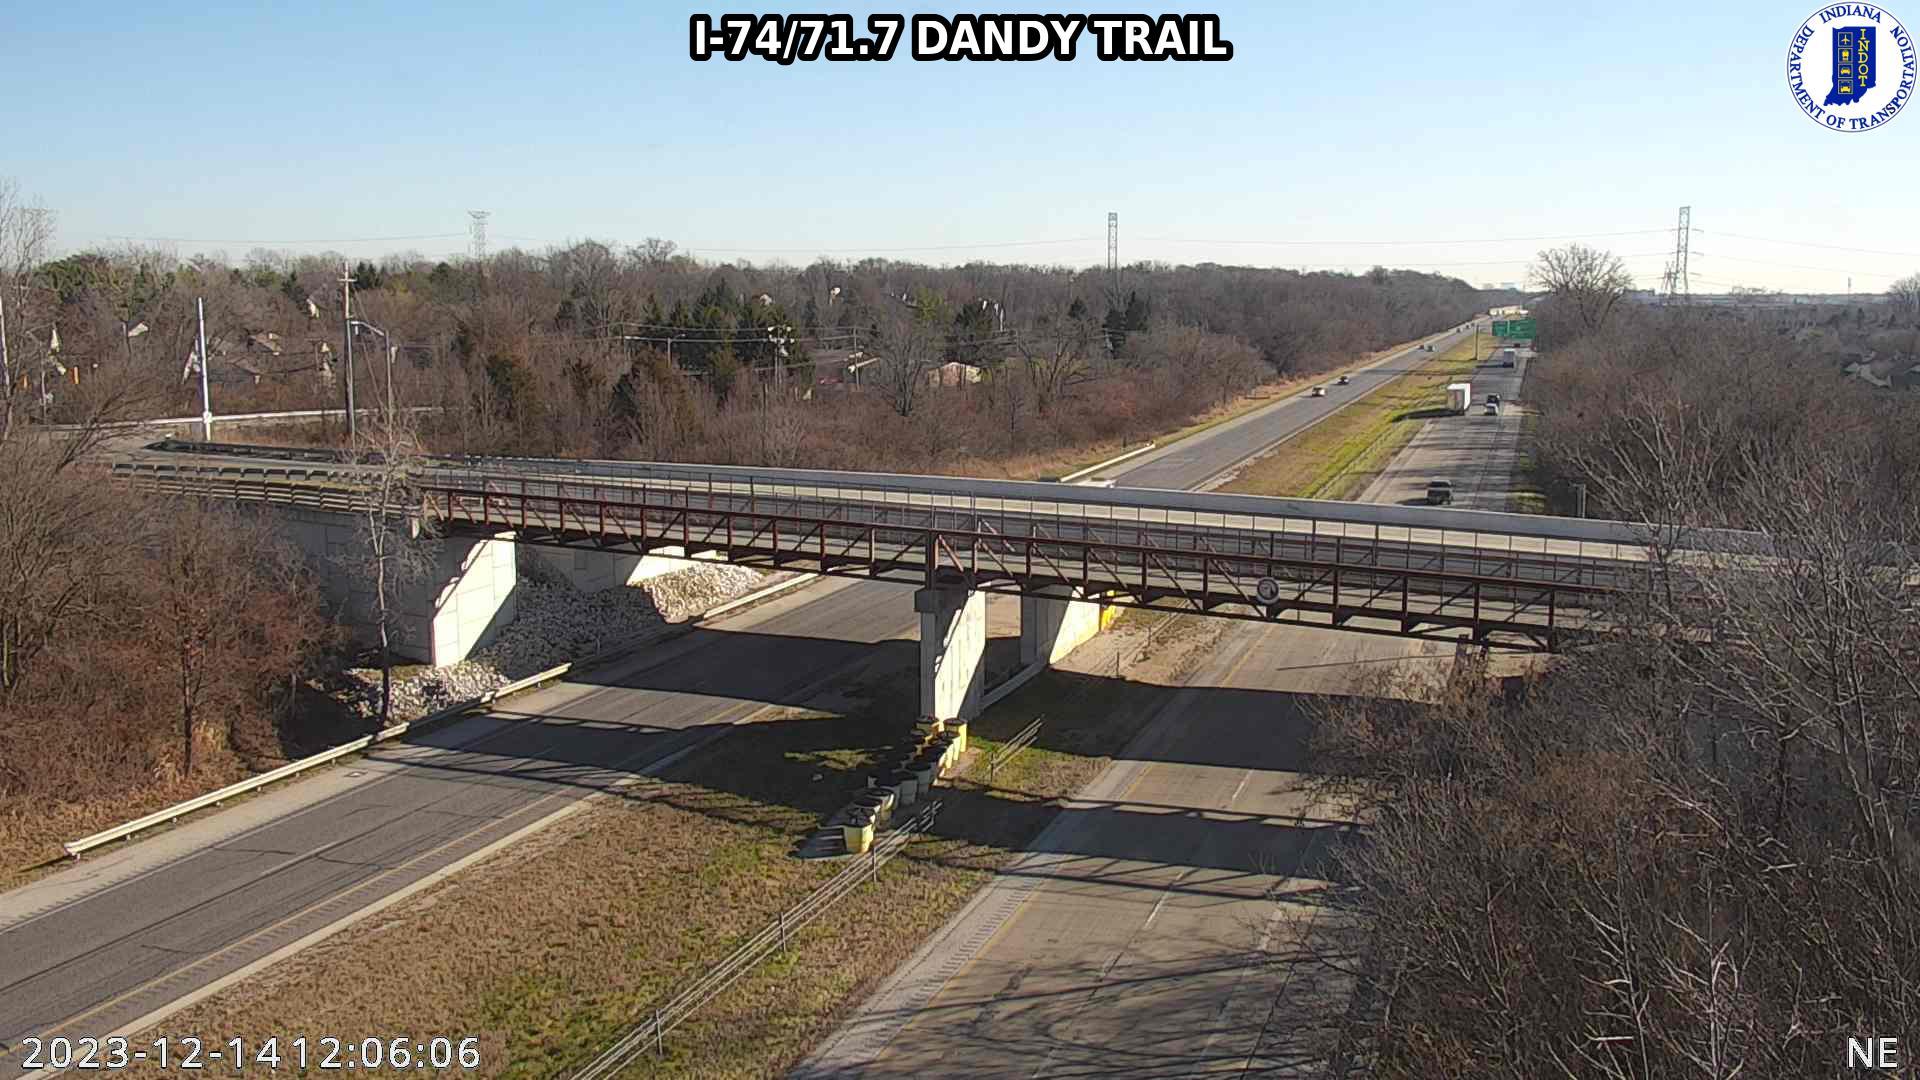 Traffic Cam Indianapolis: I-74: I-74/71.7 DANDY TRAIL Player